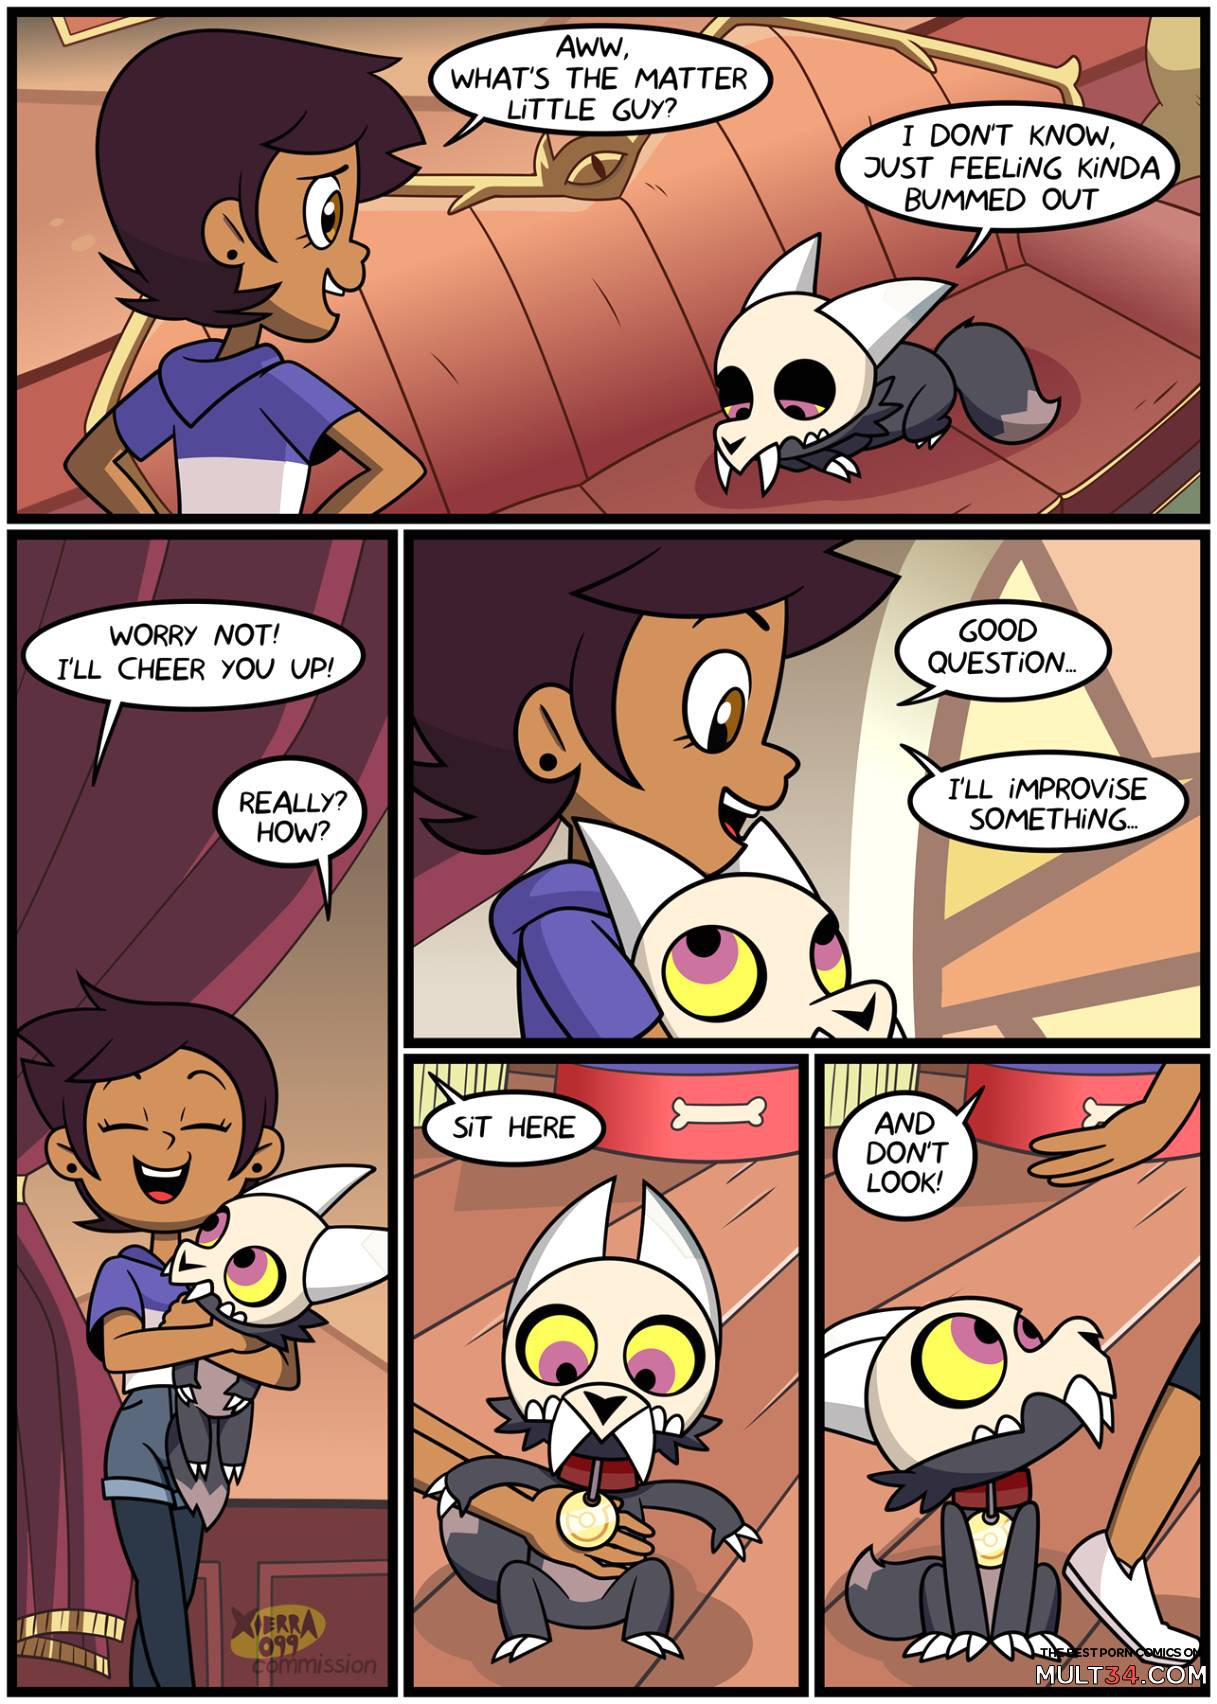 The Owl House - After Dark: King's Cheer Up page 2